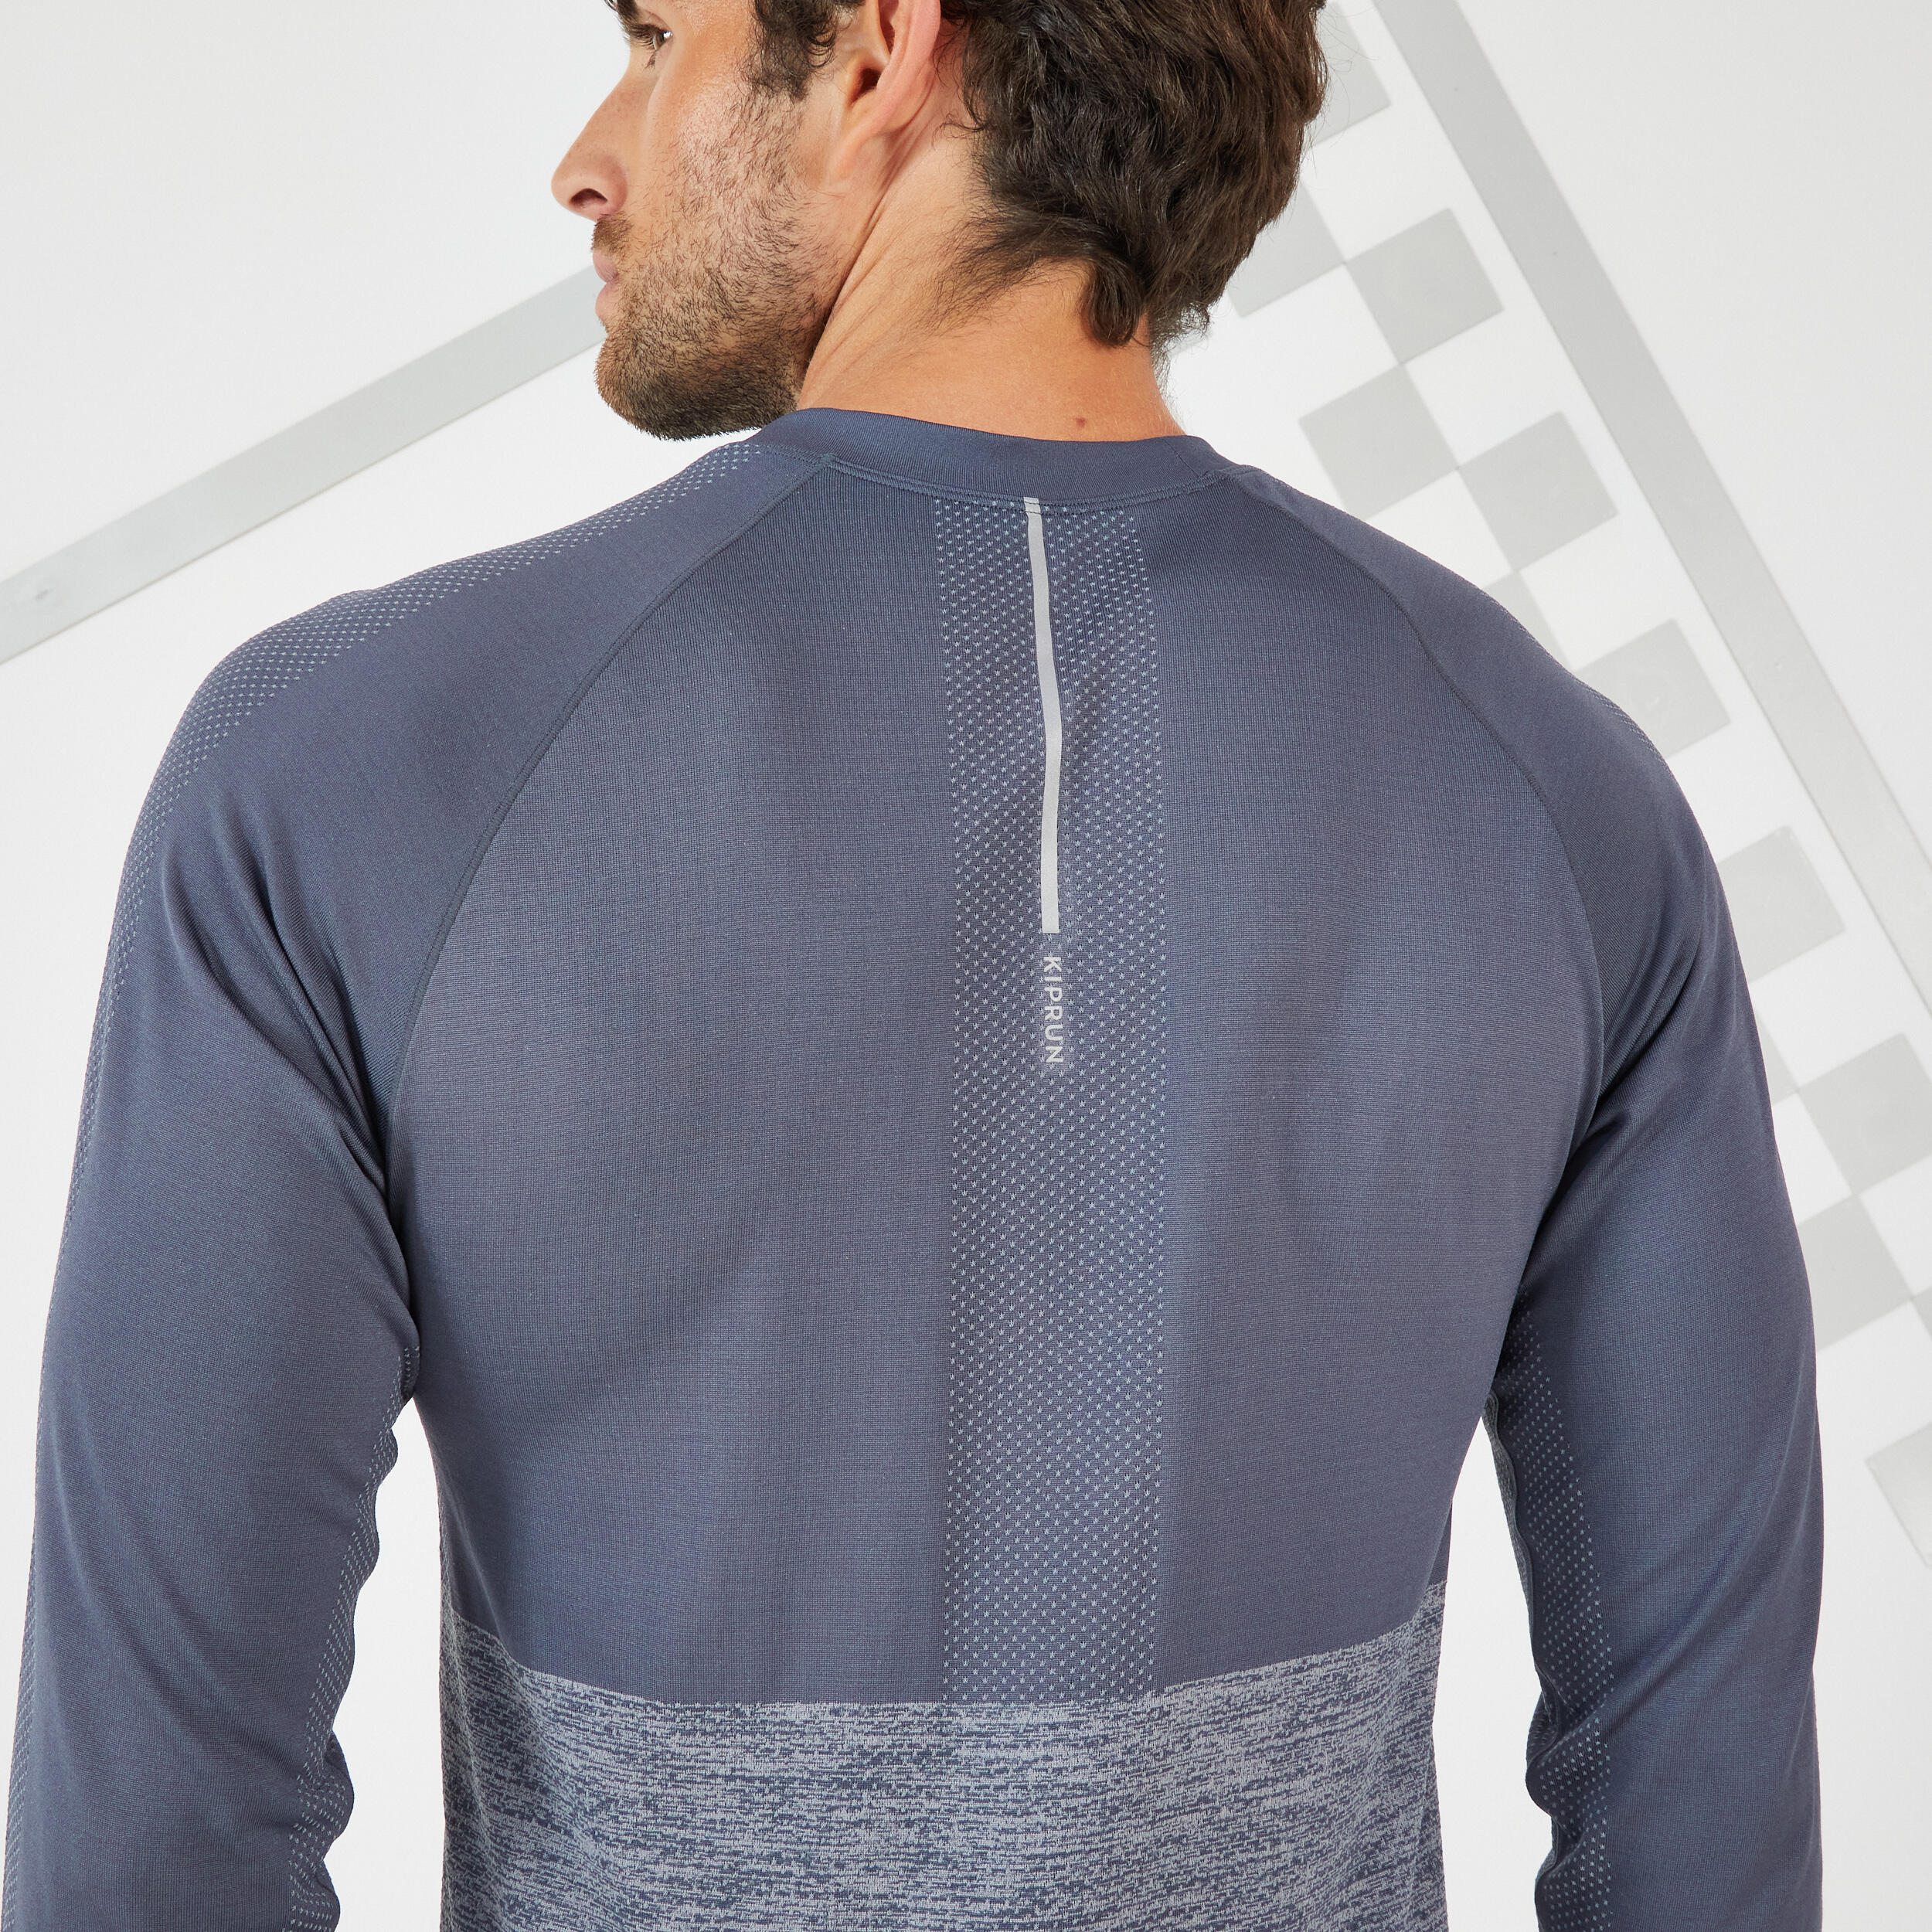 CARE MEN'S BREATHABLE LONG-SLEEVED RUNNING T-SHIRT - GREY LIMITED EDITION 7/9